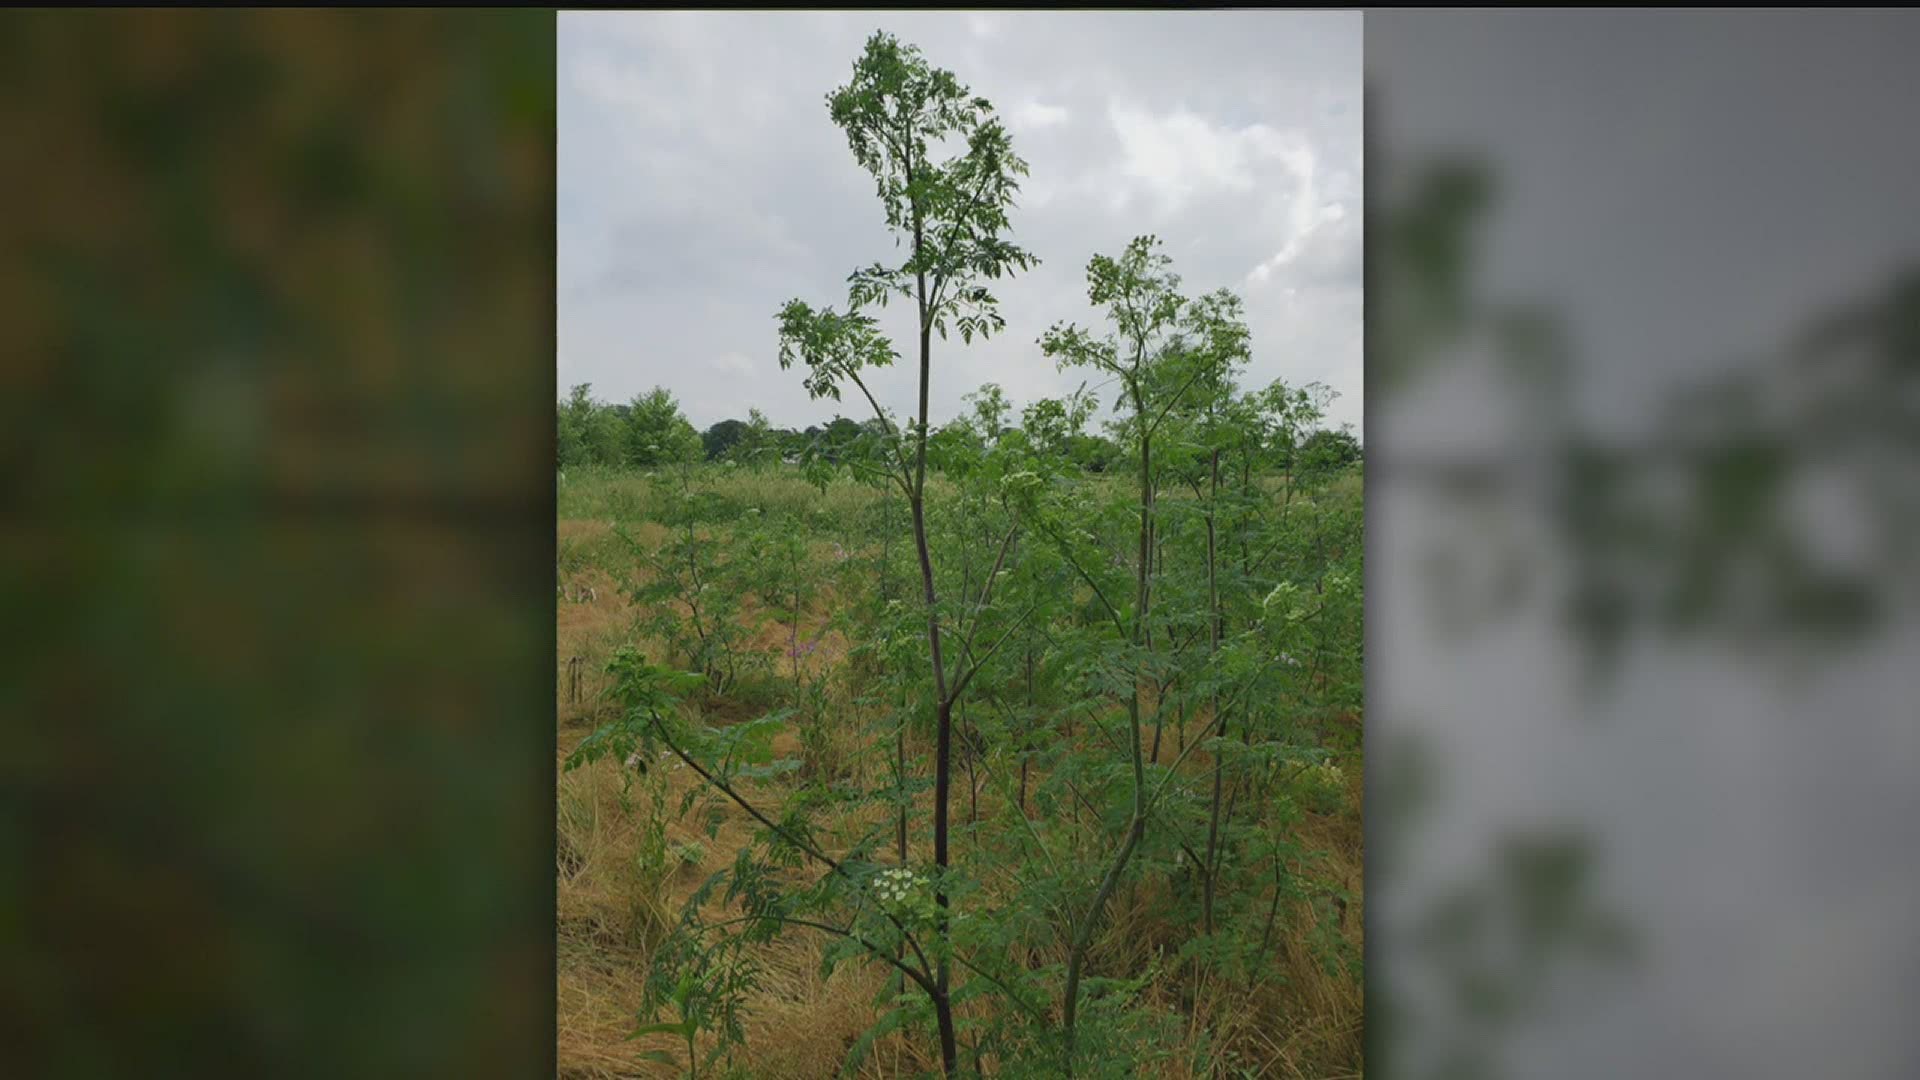 Invasive weed Conium maculatum, or poison hemlock, is spreading aggressively in Pennsylvania, according to experts at Penn State Extension.